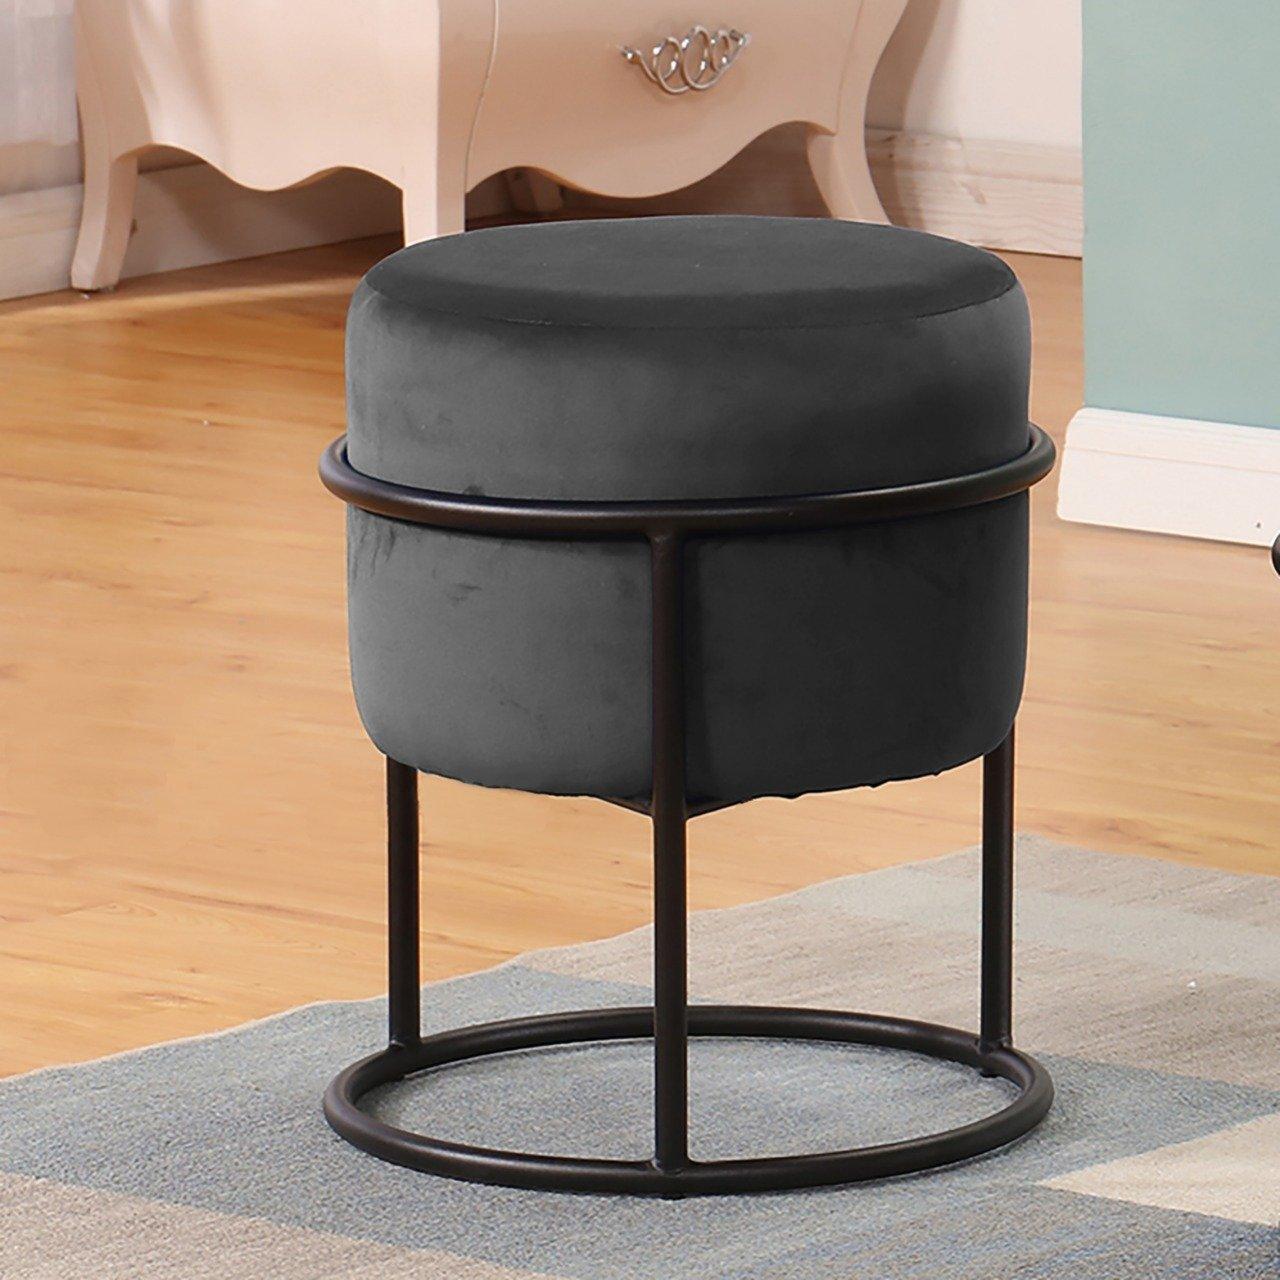 Luxury Wooden Round stool With Steel Stand -344 - 92Bedding